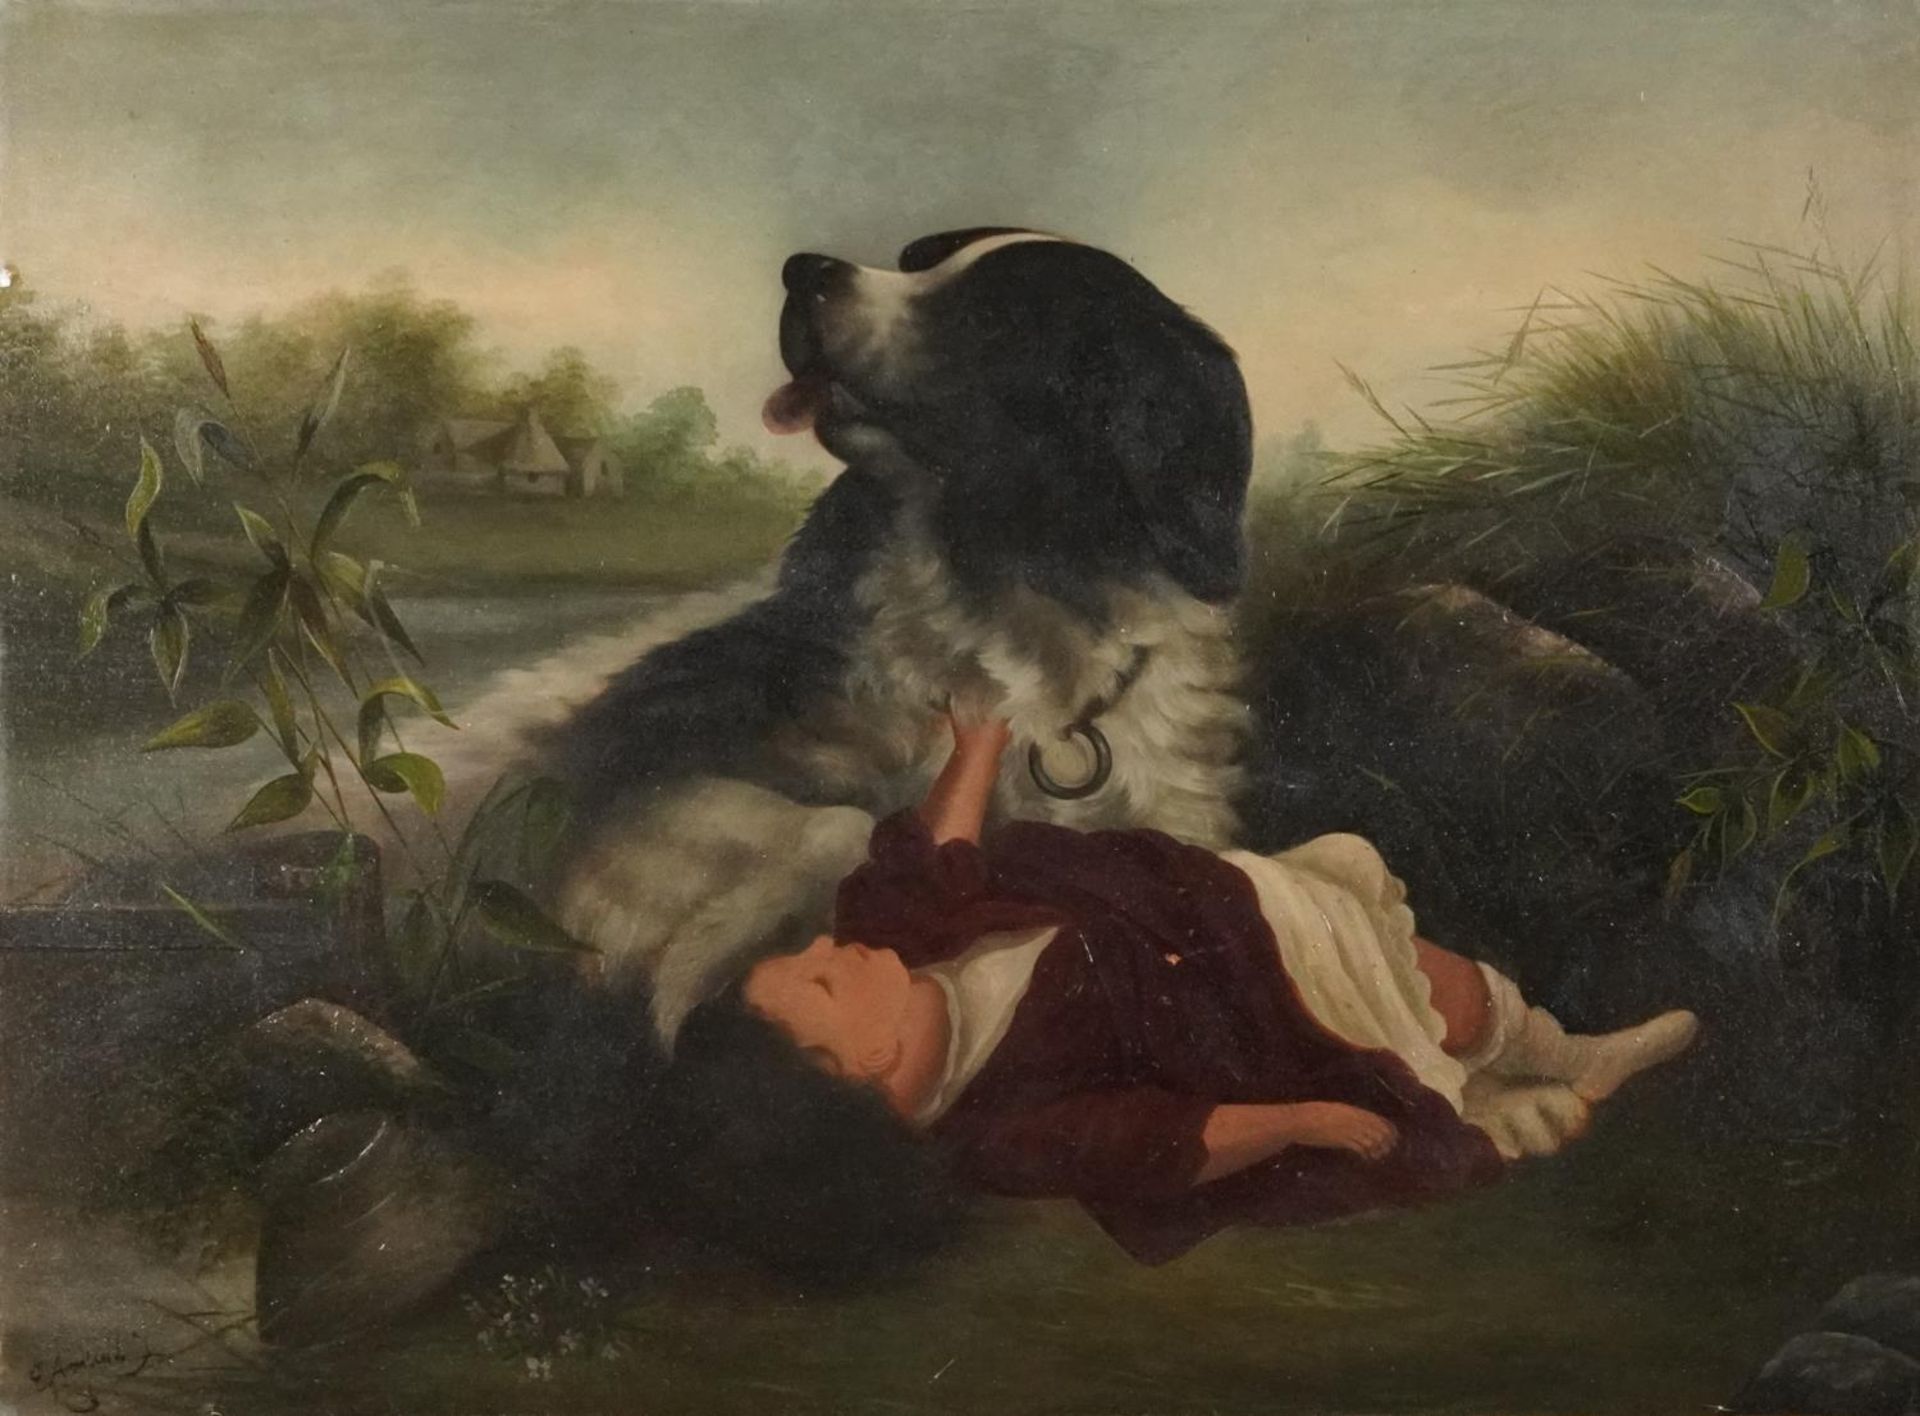 After Edward Landseer - Spaniel with child in a landscape, 19th century style oil on board bearing